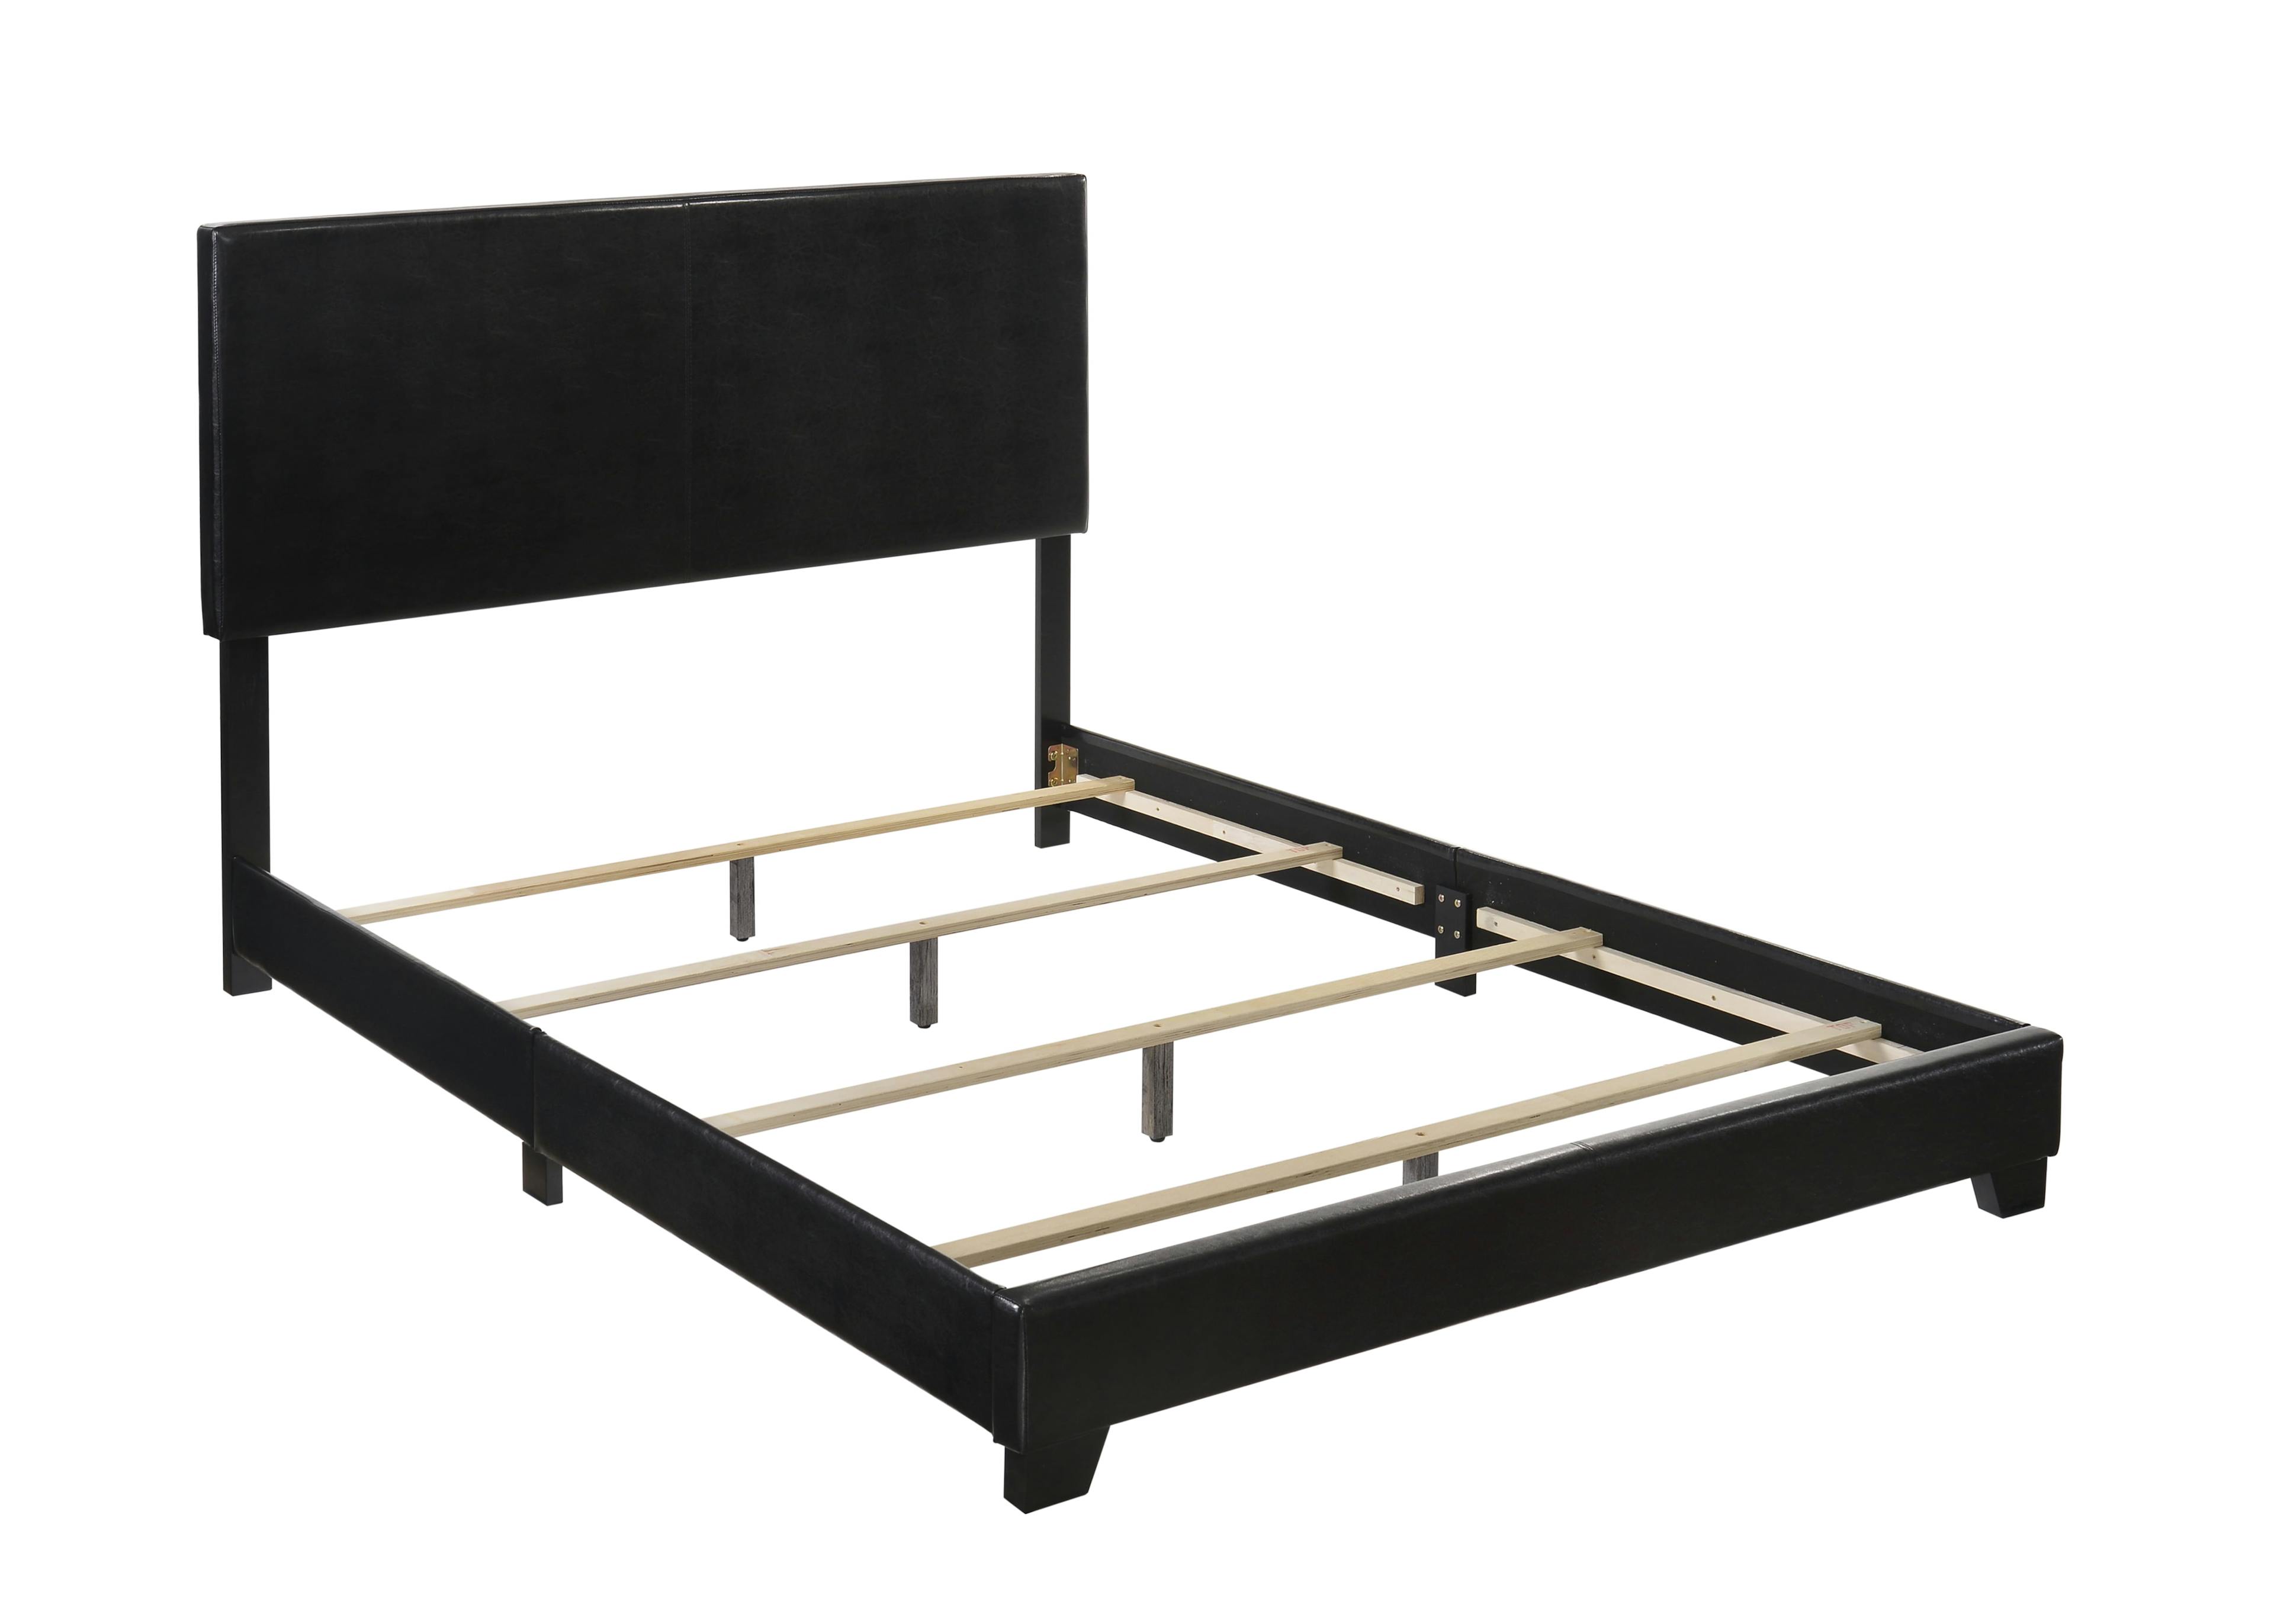 Transitional Full/Double Black Faux Leather Platform Bed with Upholstered Headboard